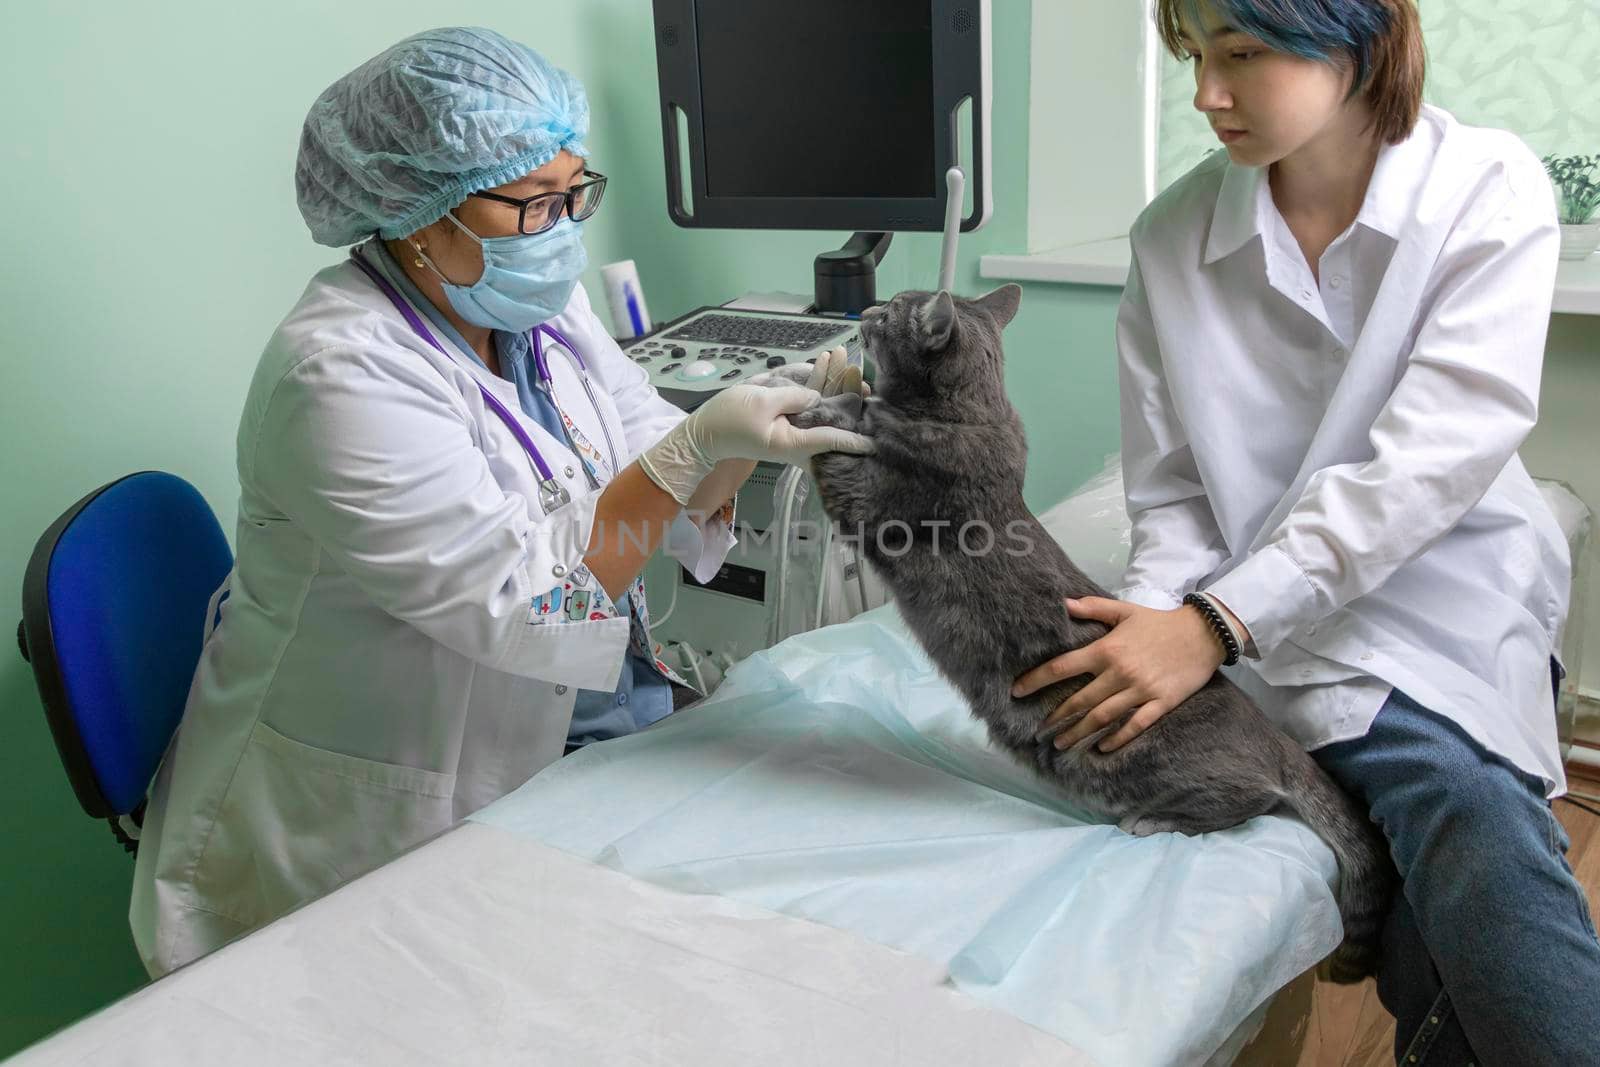 examination of a cat in a veterinary clinic. Woman veterinarian examines a sick gray cat. Soft focus